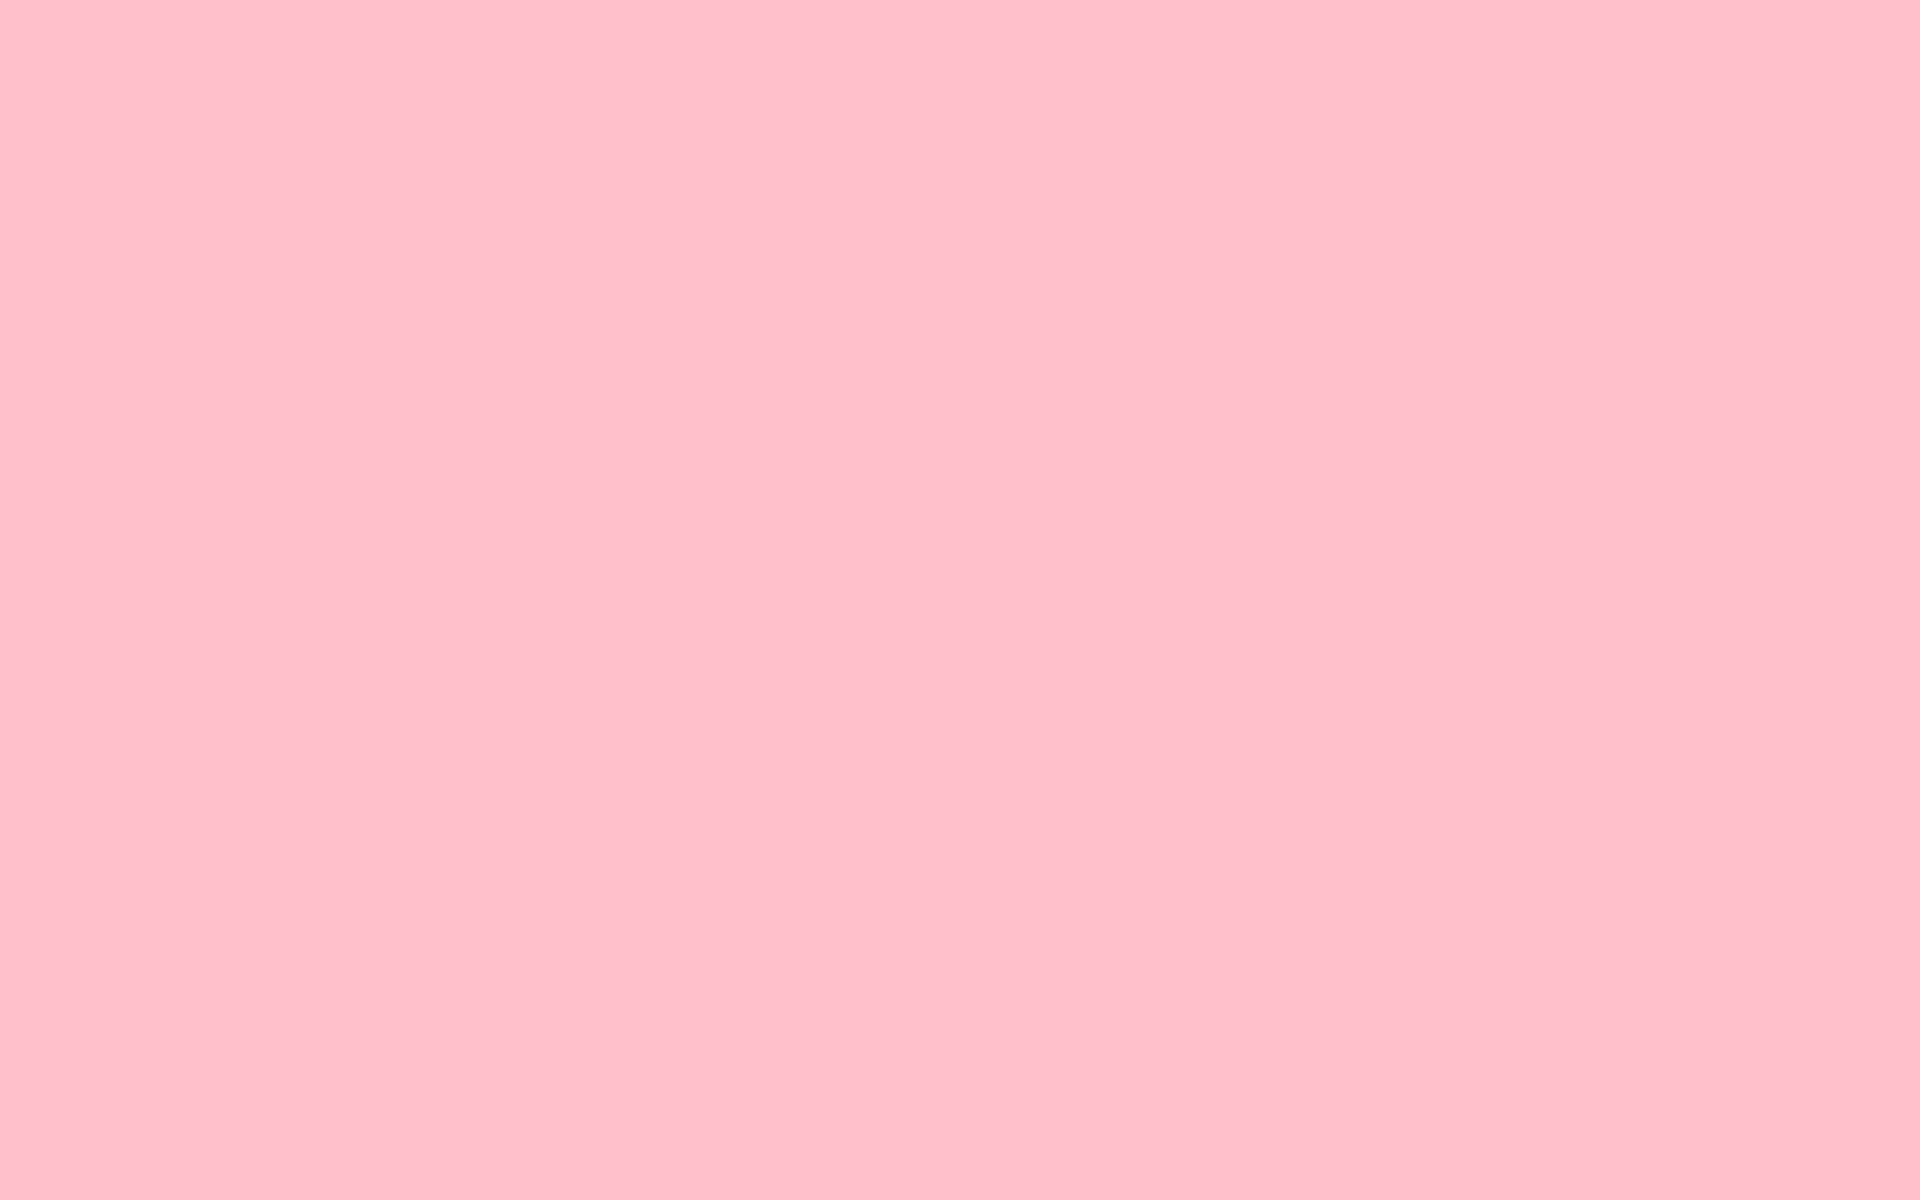 20 Excellent simple pink desktop wallpaper You Can Download It Free Of ...